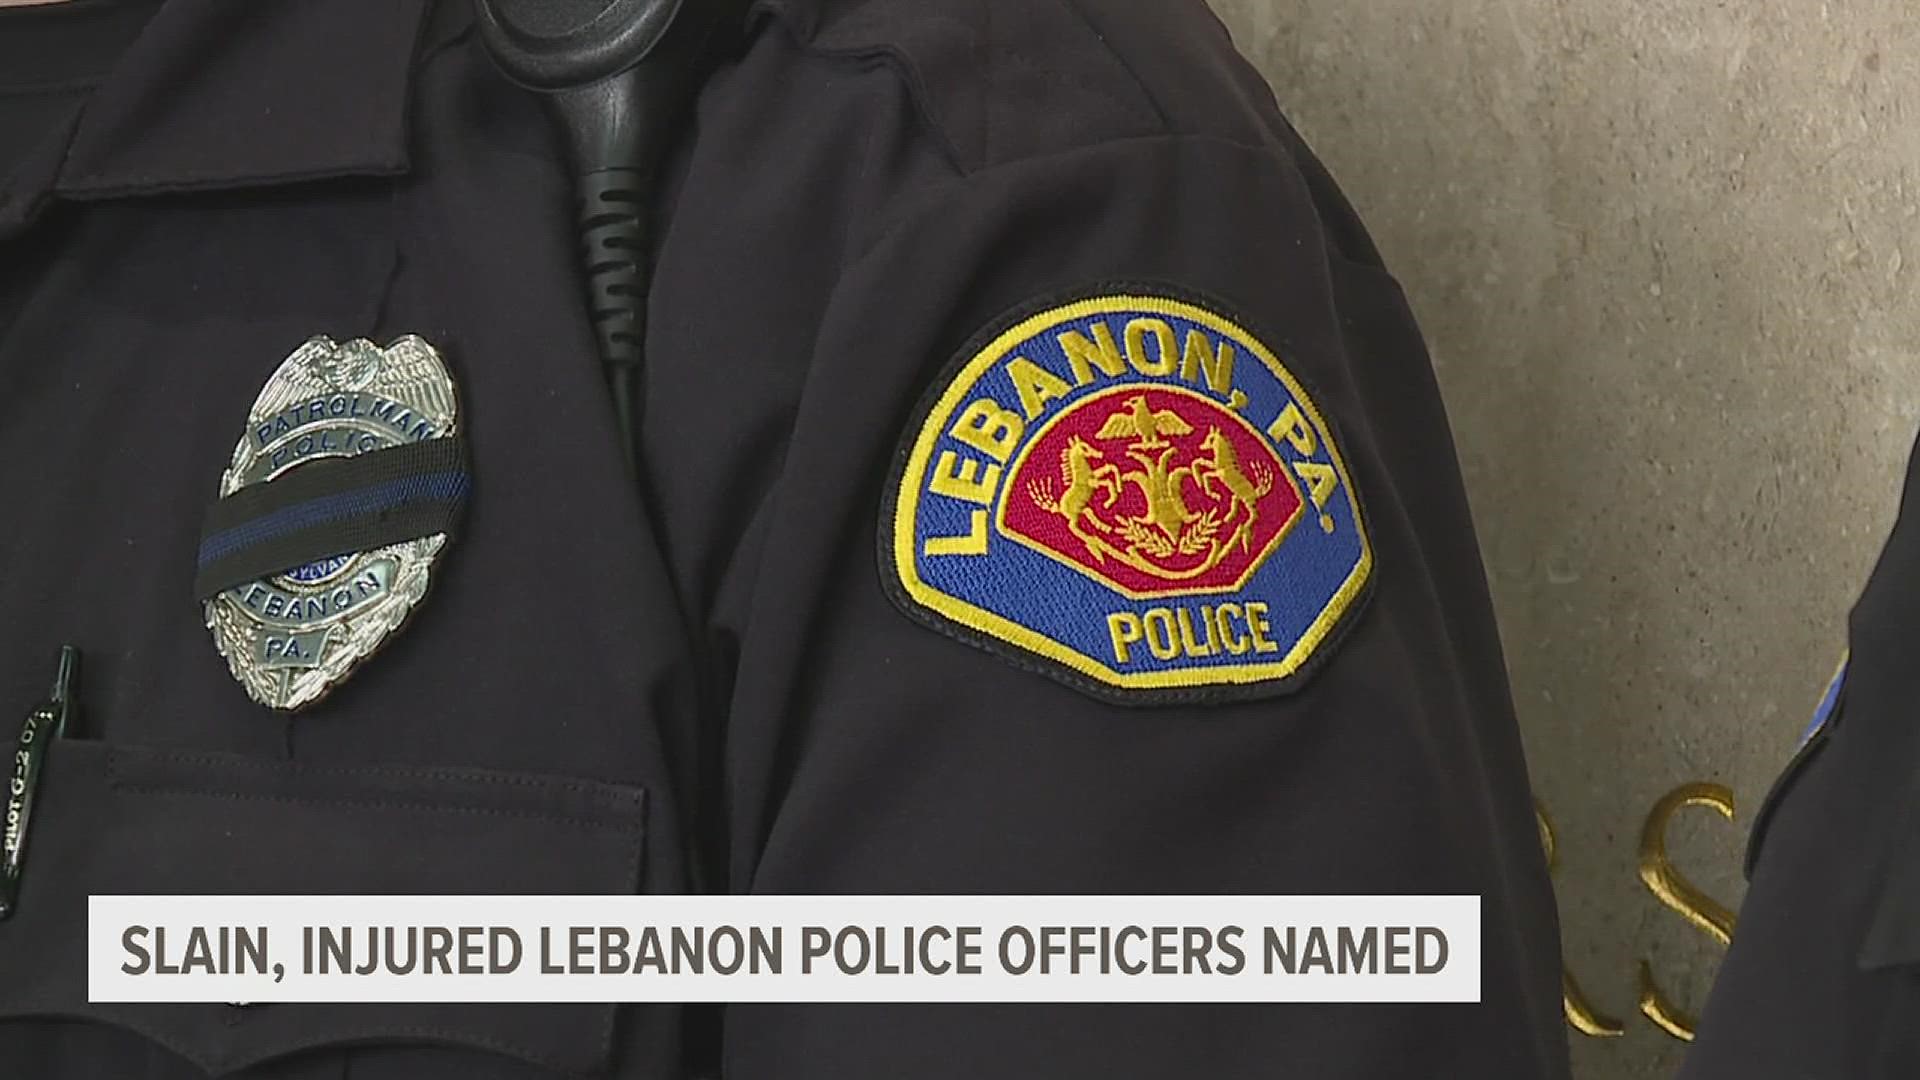 The Lebanon County District Attorney's Office confirmed during a press conference that the officer who died in Thursday's shooting was Lieutenant William Lebo.